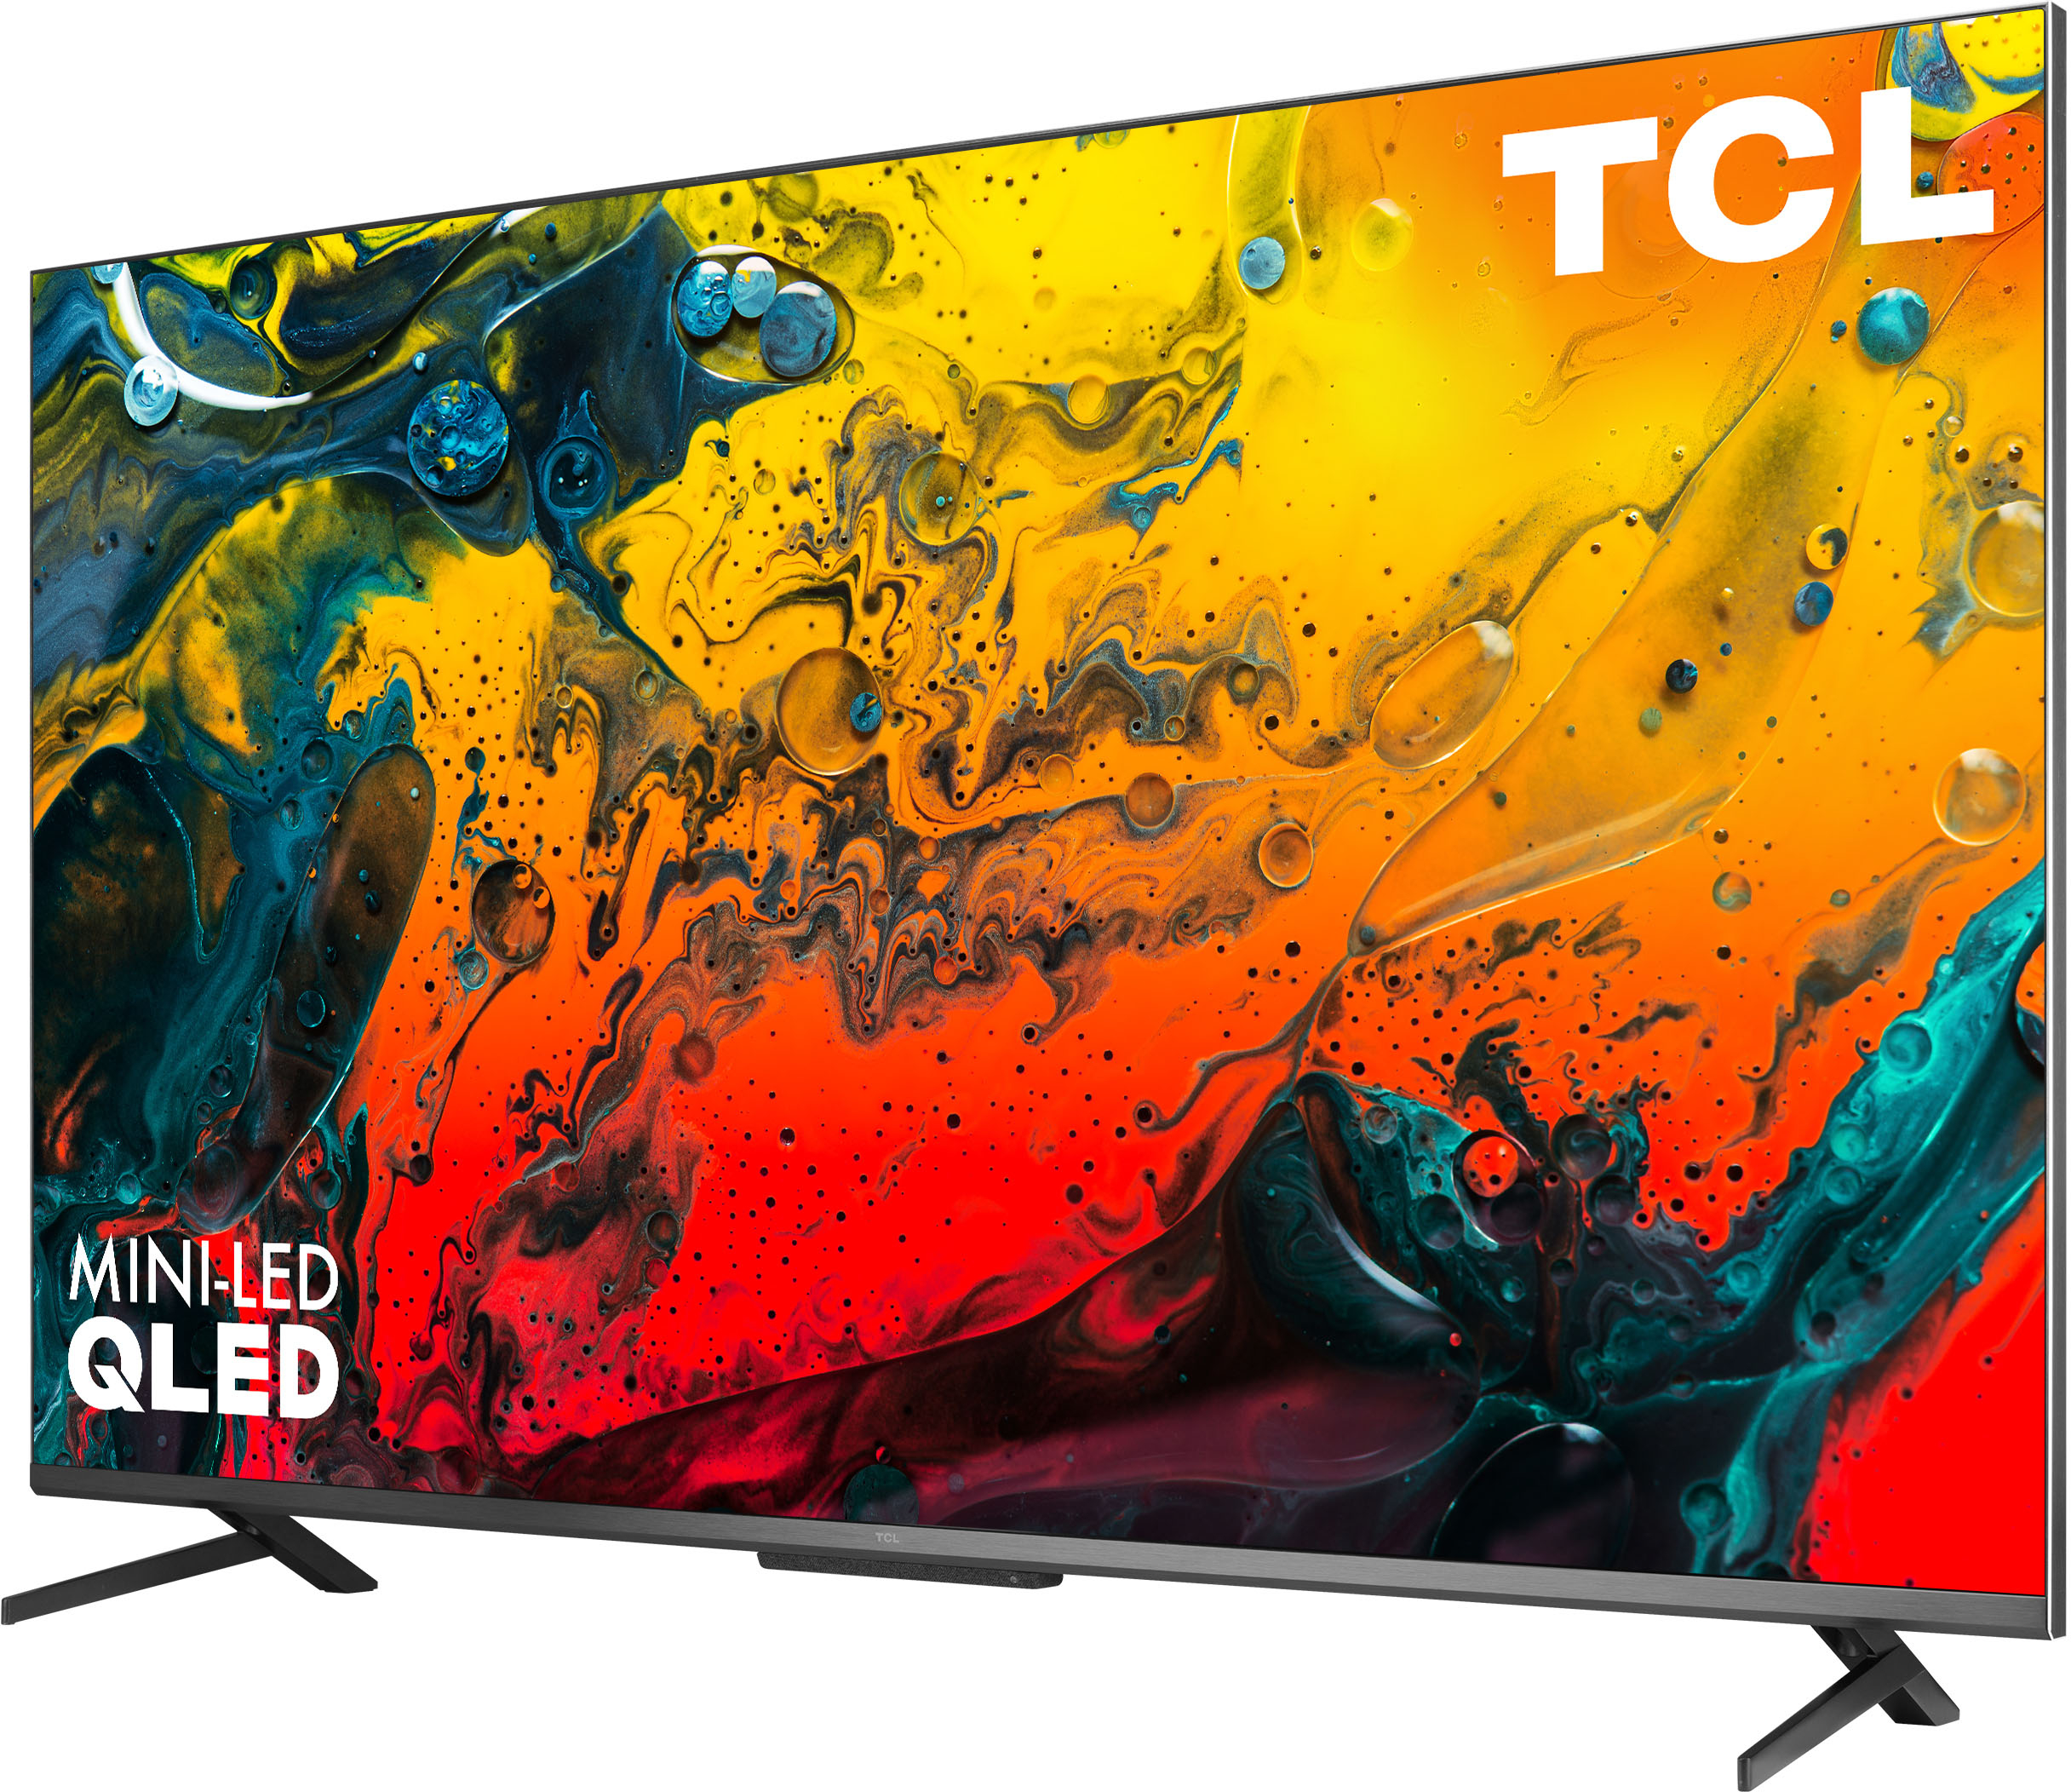 Best Budget 4K 120hz Gaming TV - TCL Series 6 R646 on PS5 & Xbox Series X 